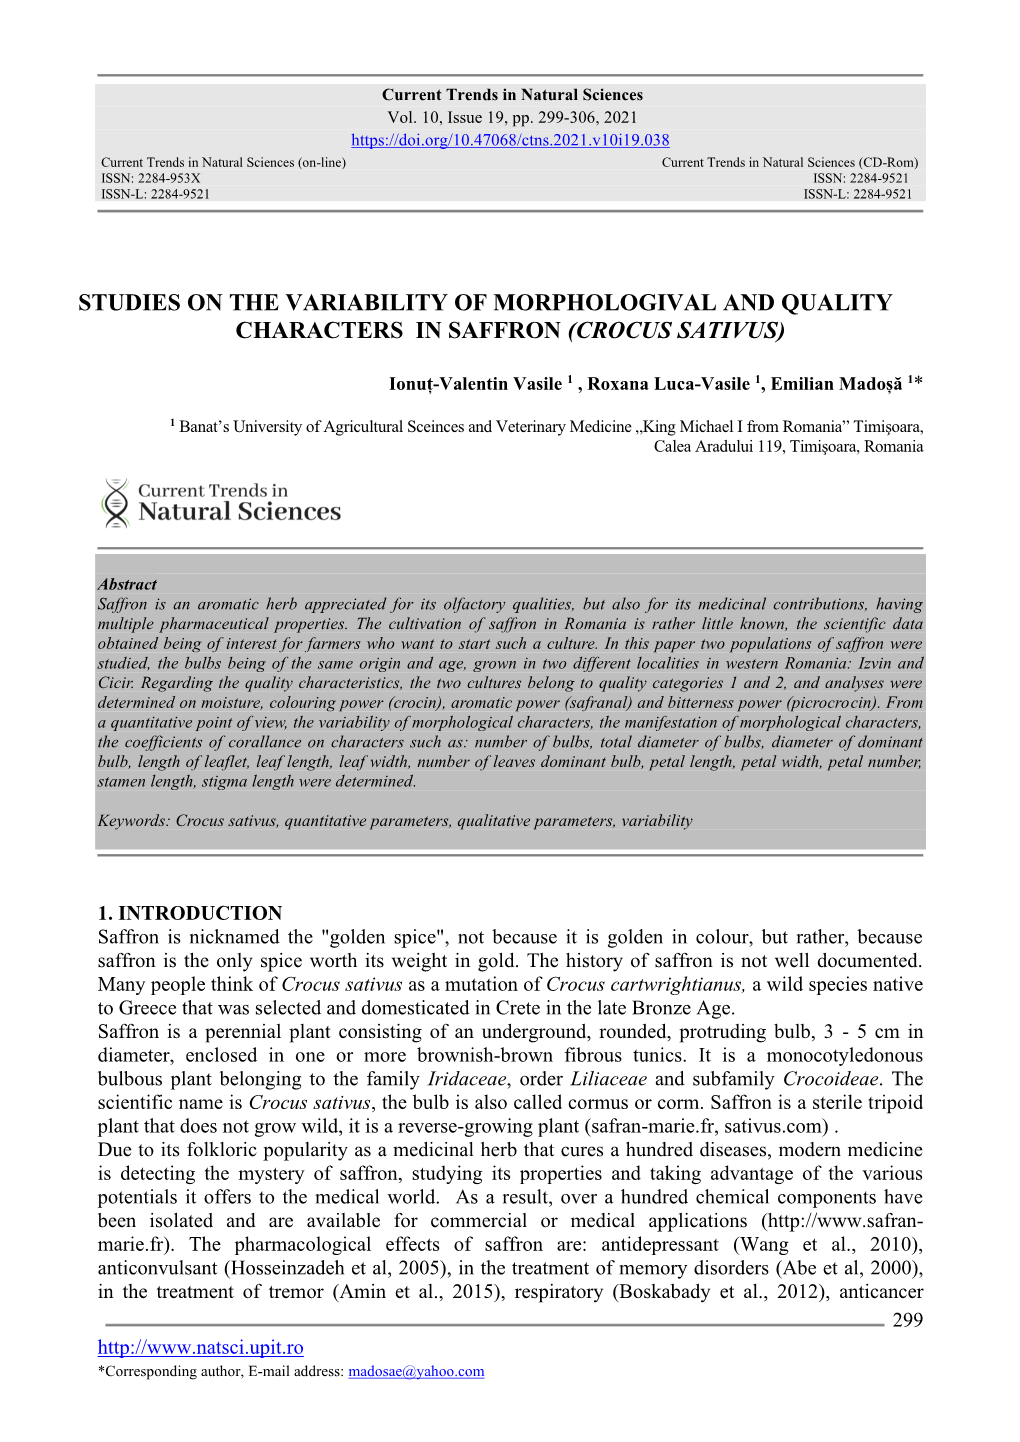 Studies on the Variability of Morphologival and Quality Characters in Saffron (Crocus Sativus)